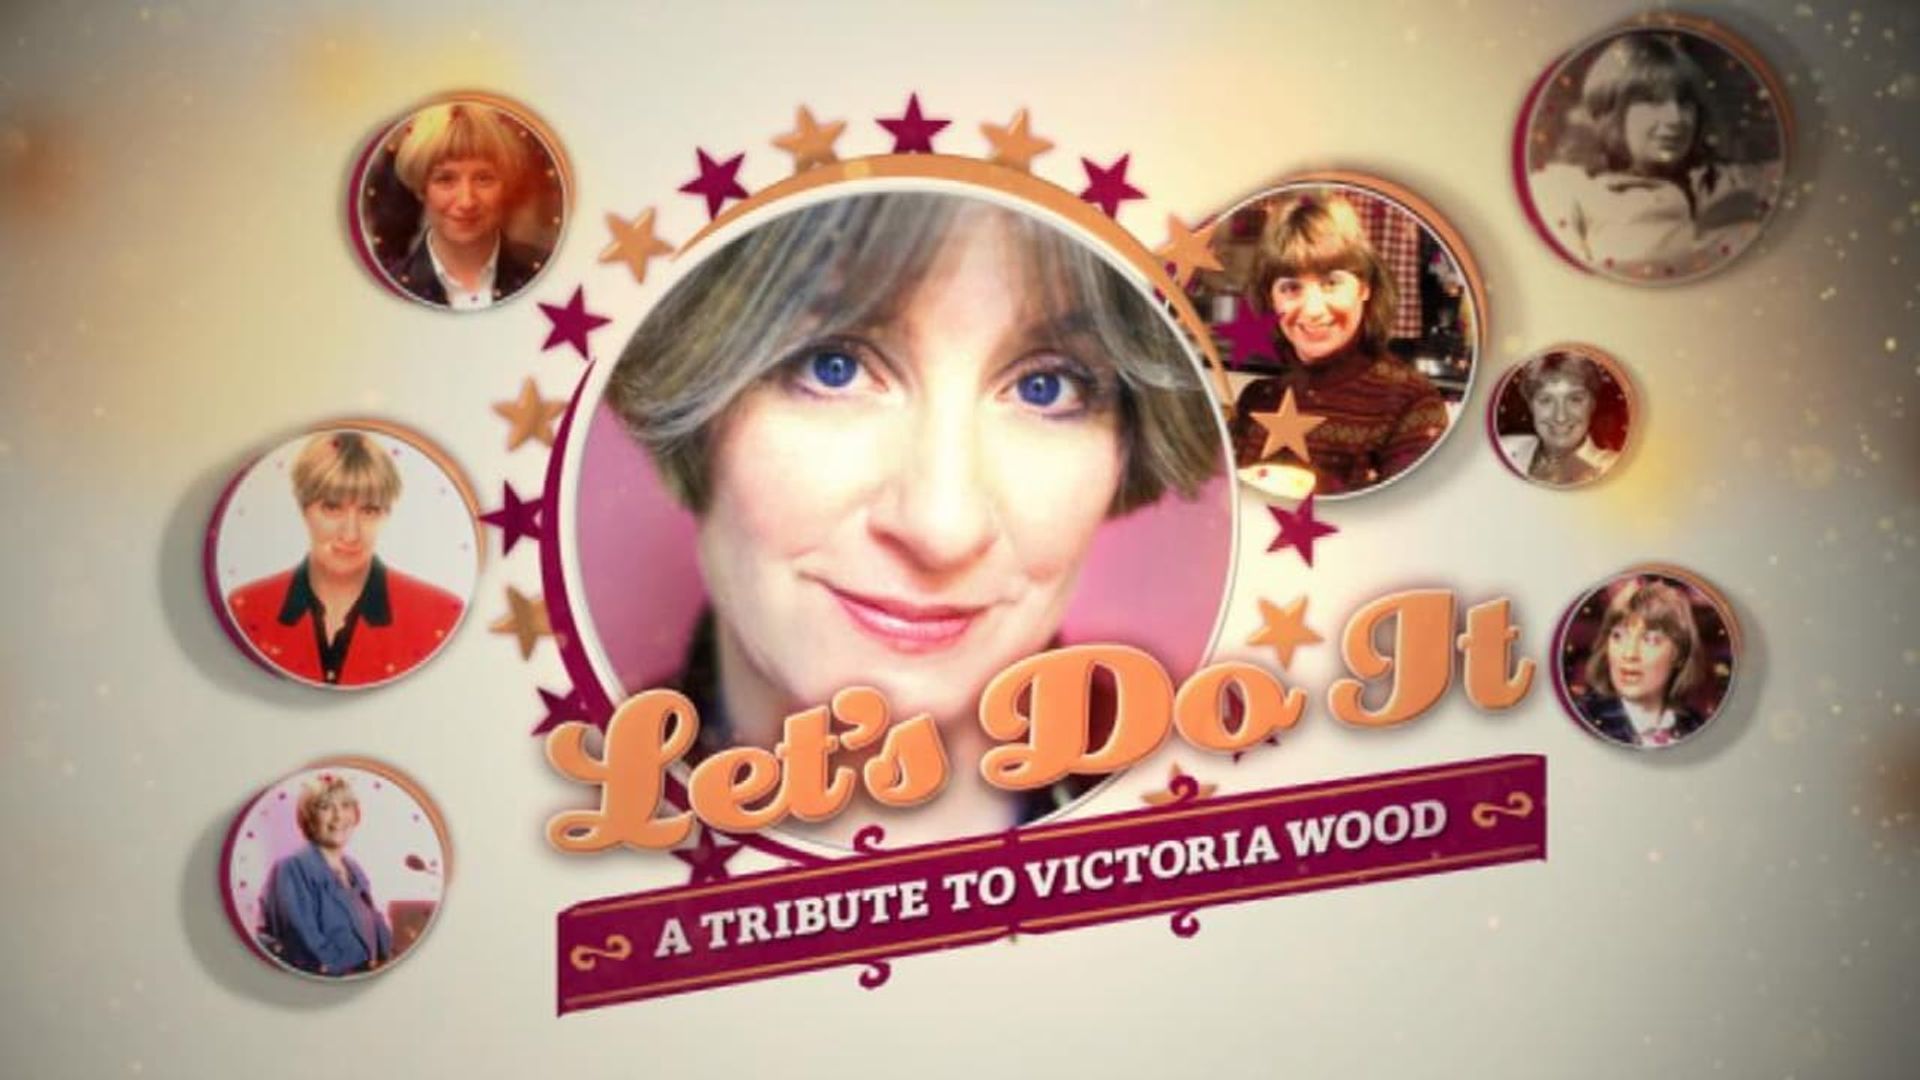 Let's Do It: A Tribute to Victoria Wood background